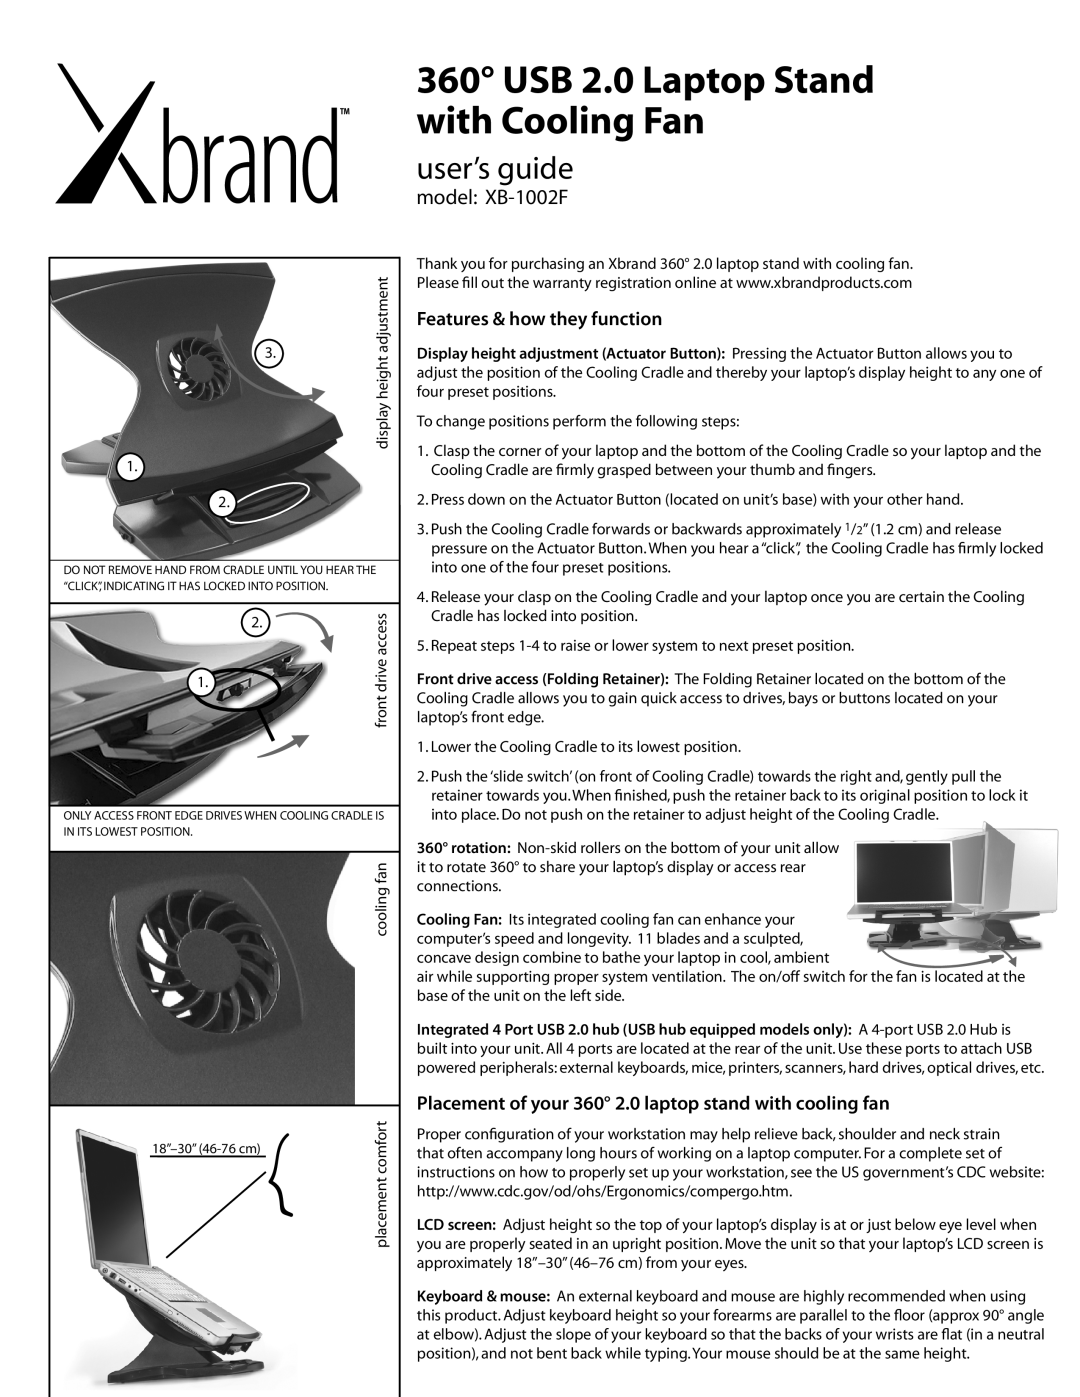 Xbrand XB-1002F warranty Features & how they function, brand, with Cooling Fan, USB 2.0 Laptop Stand, user’s guide, front 